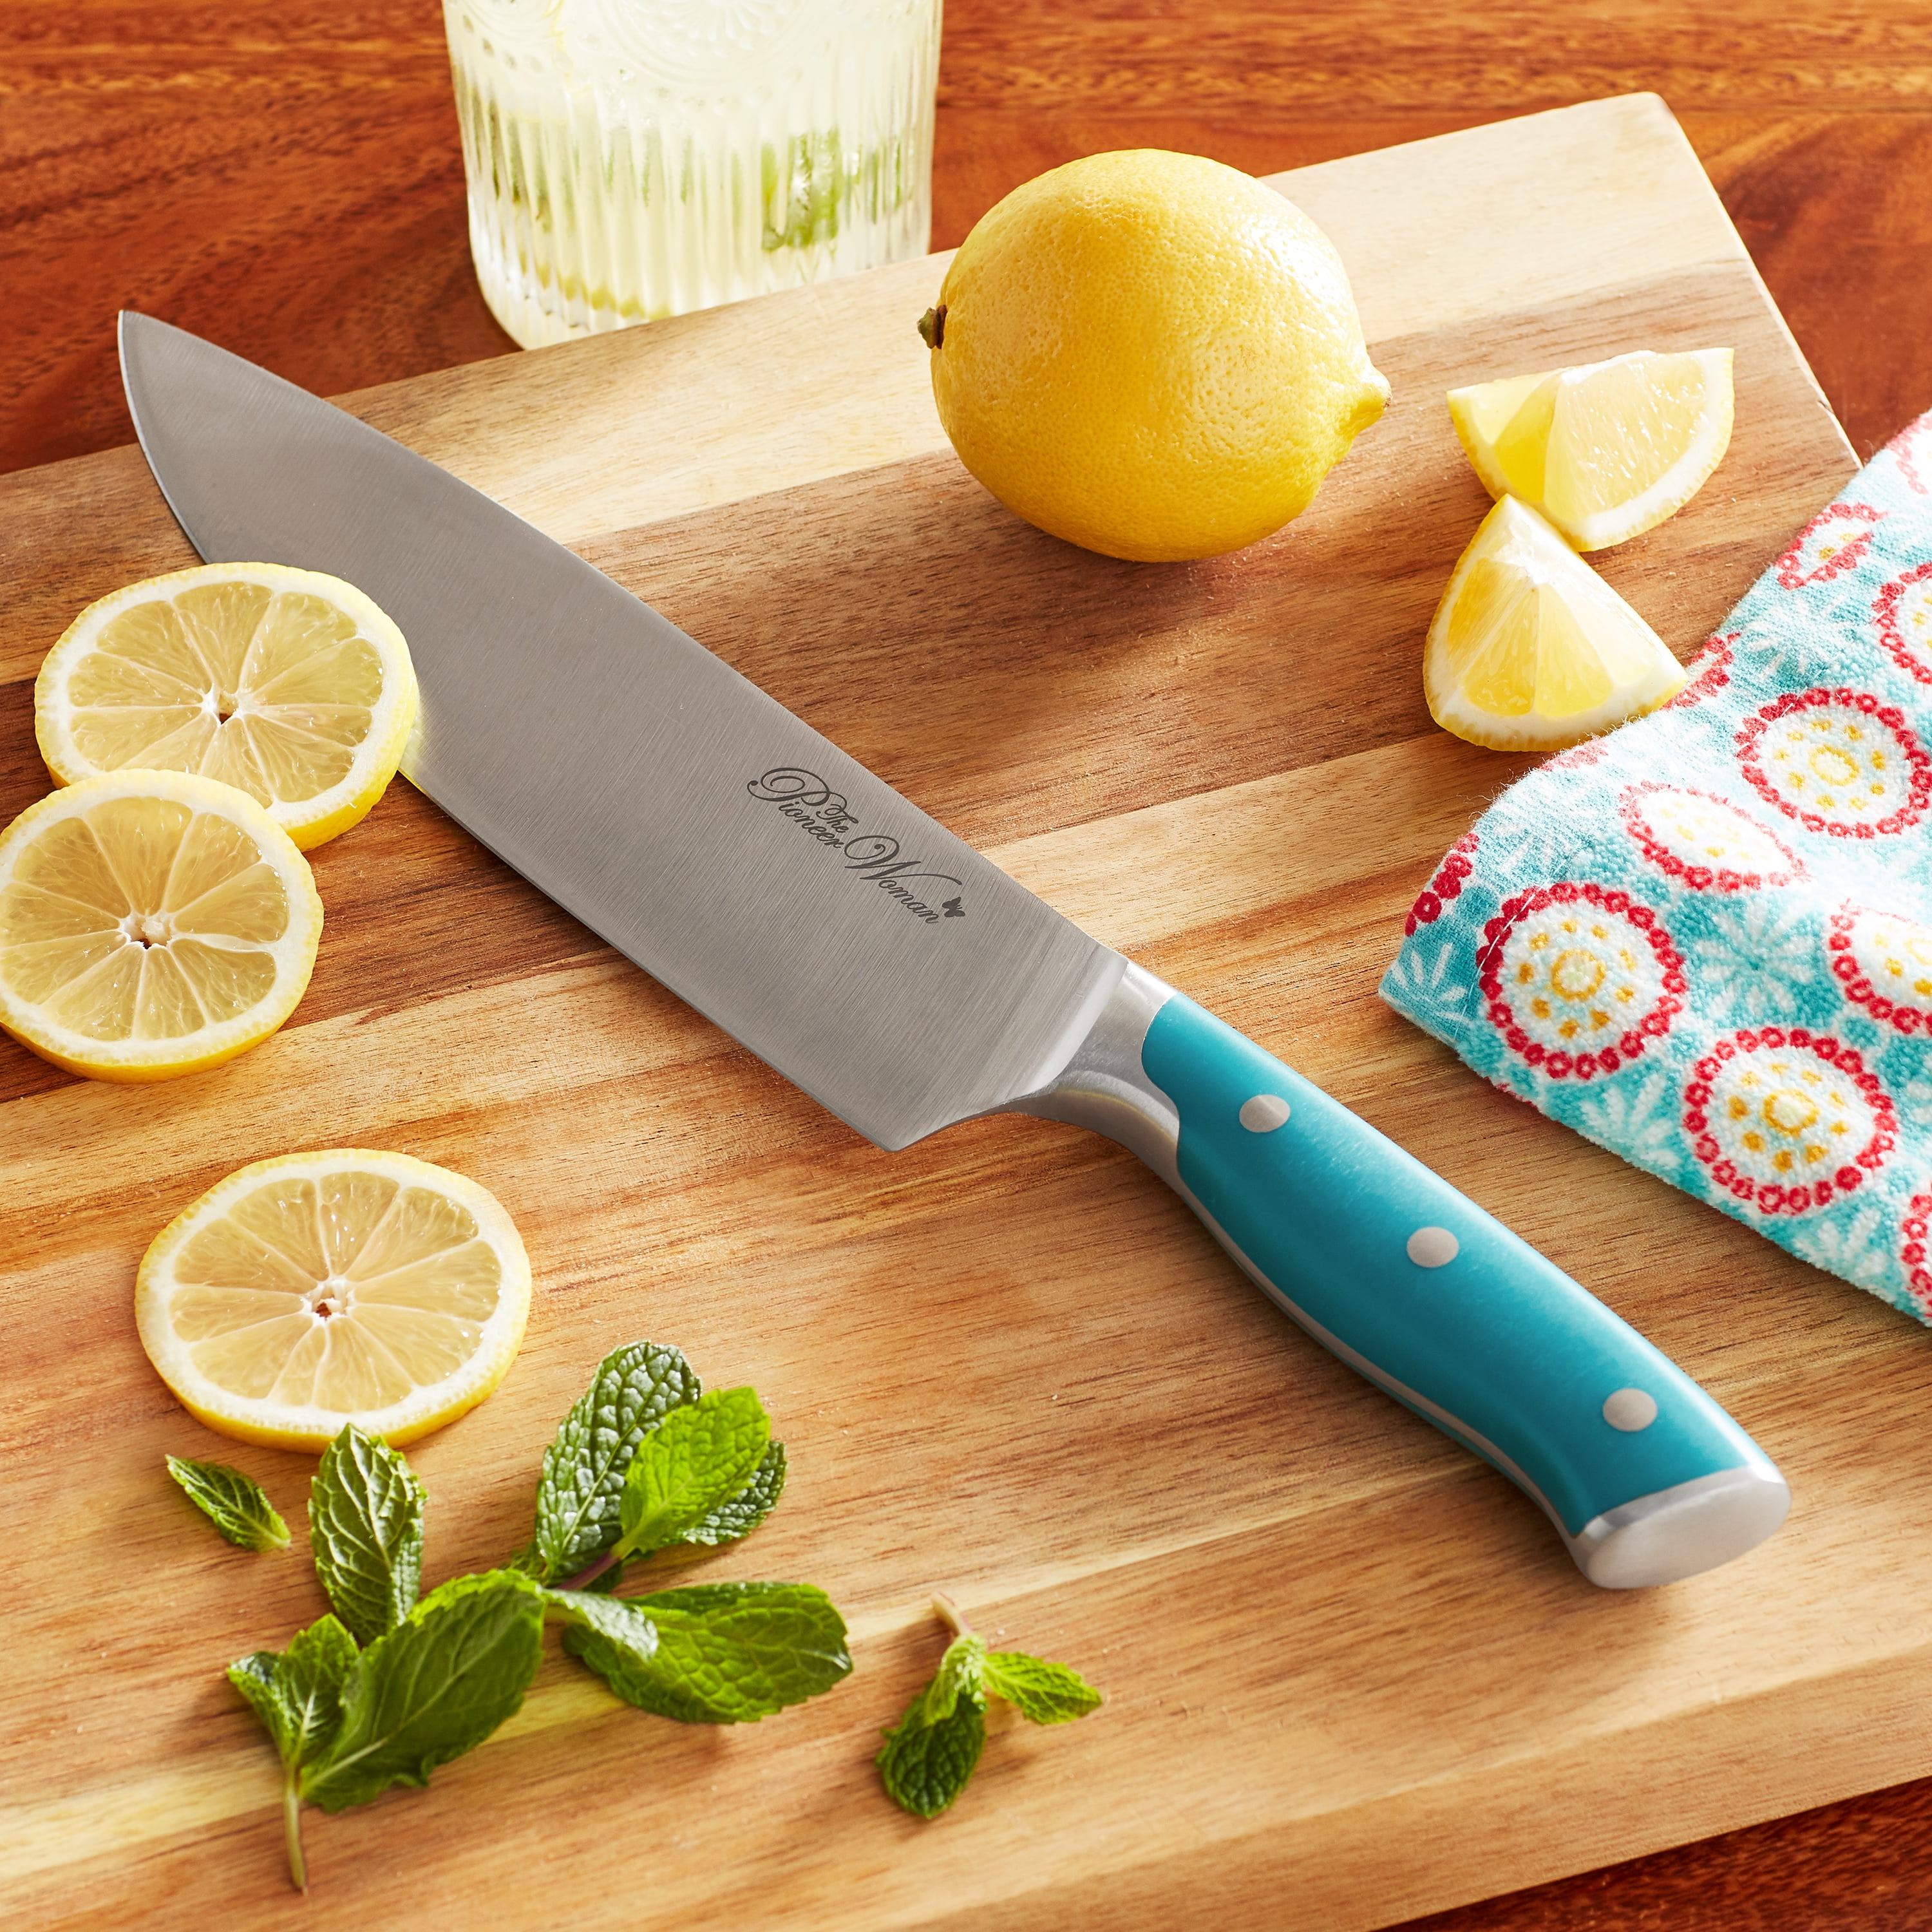 The Pioneer Woman Pioneer Signature Stainless Steel Chef Knife, 8 inch, Teal